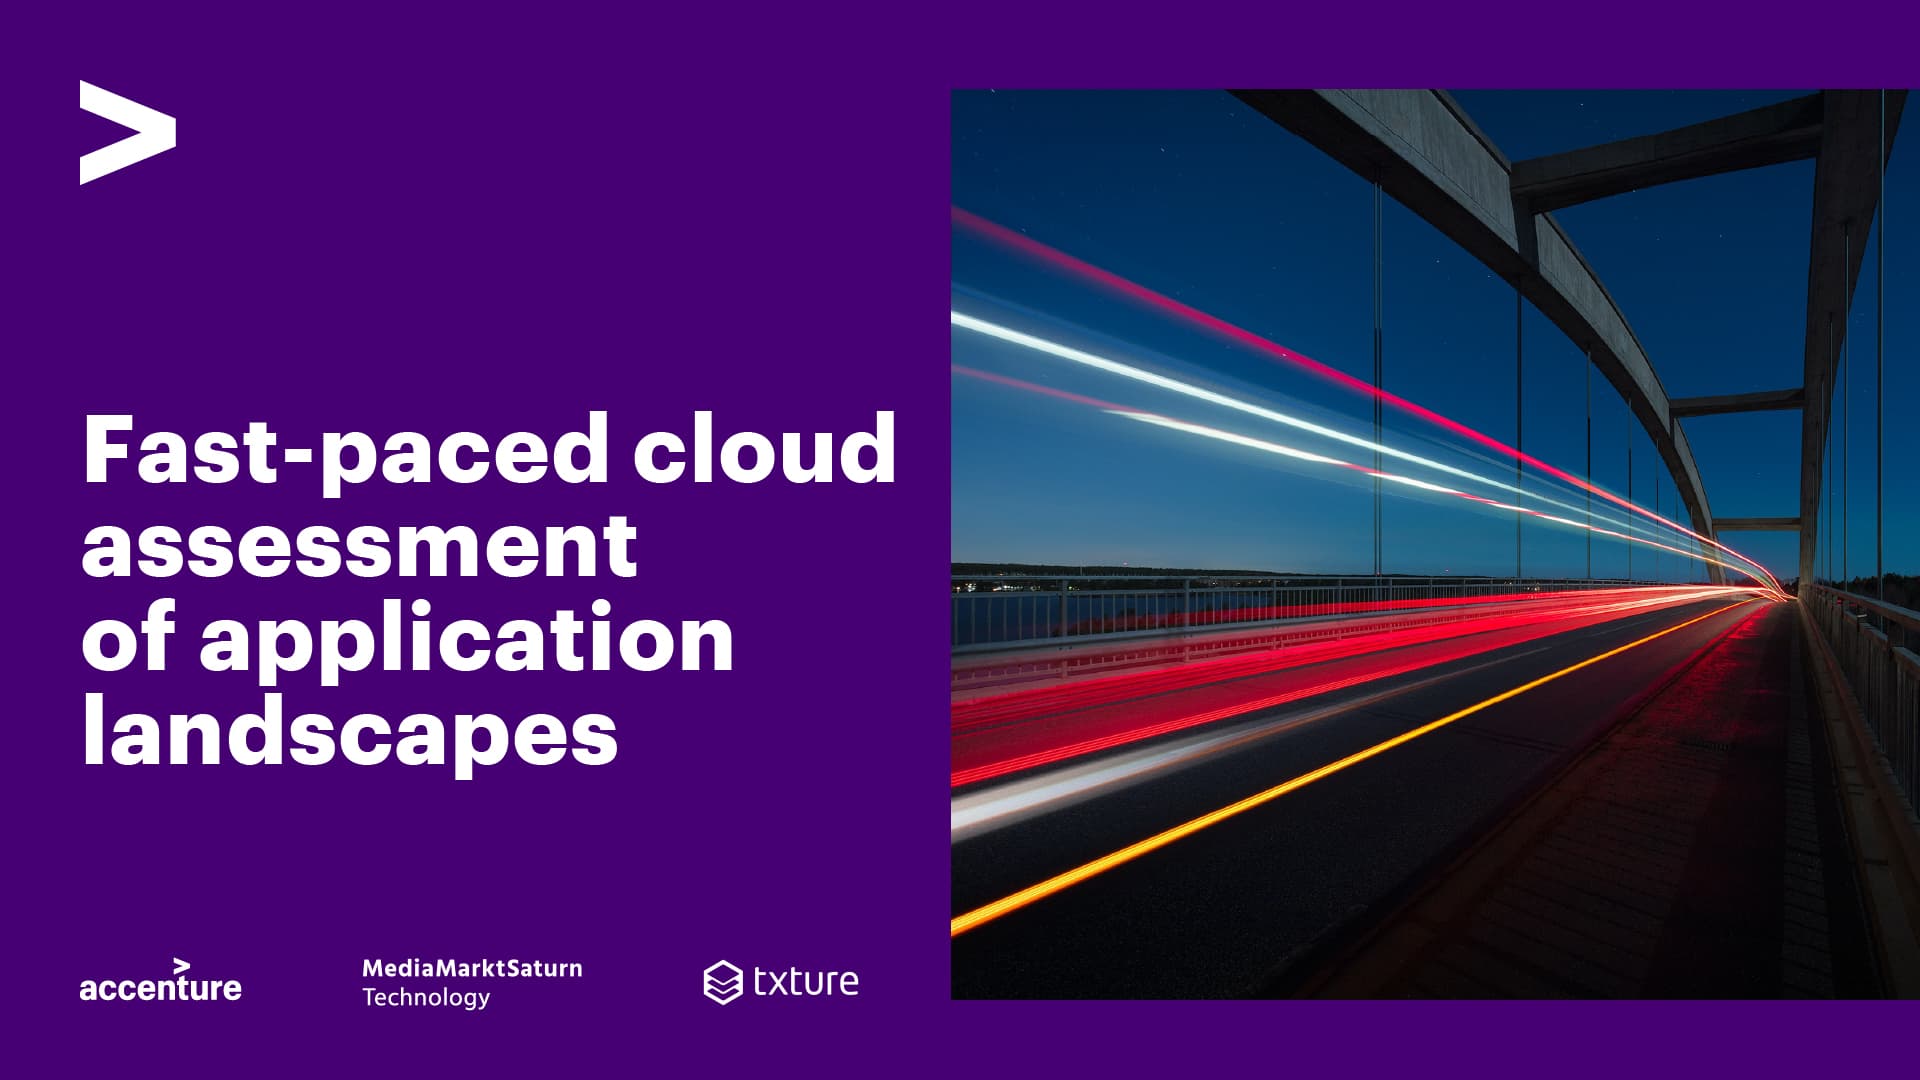 Fast-paced cloud assessment of application landscapes